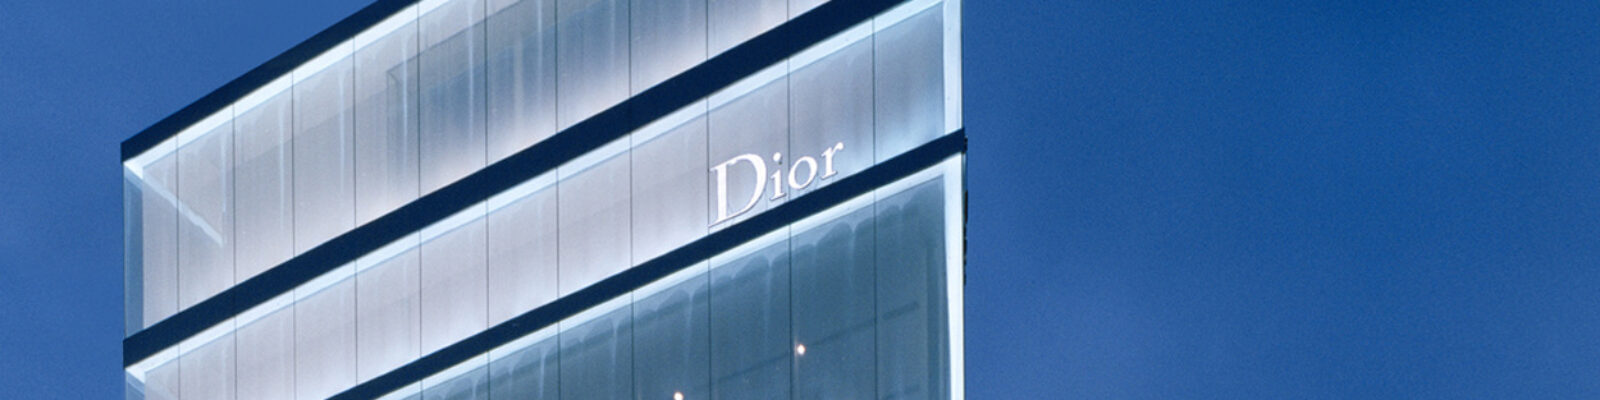 Detail of the illuminated facade of the Dior building